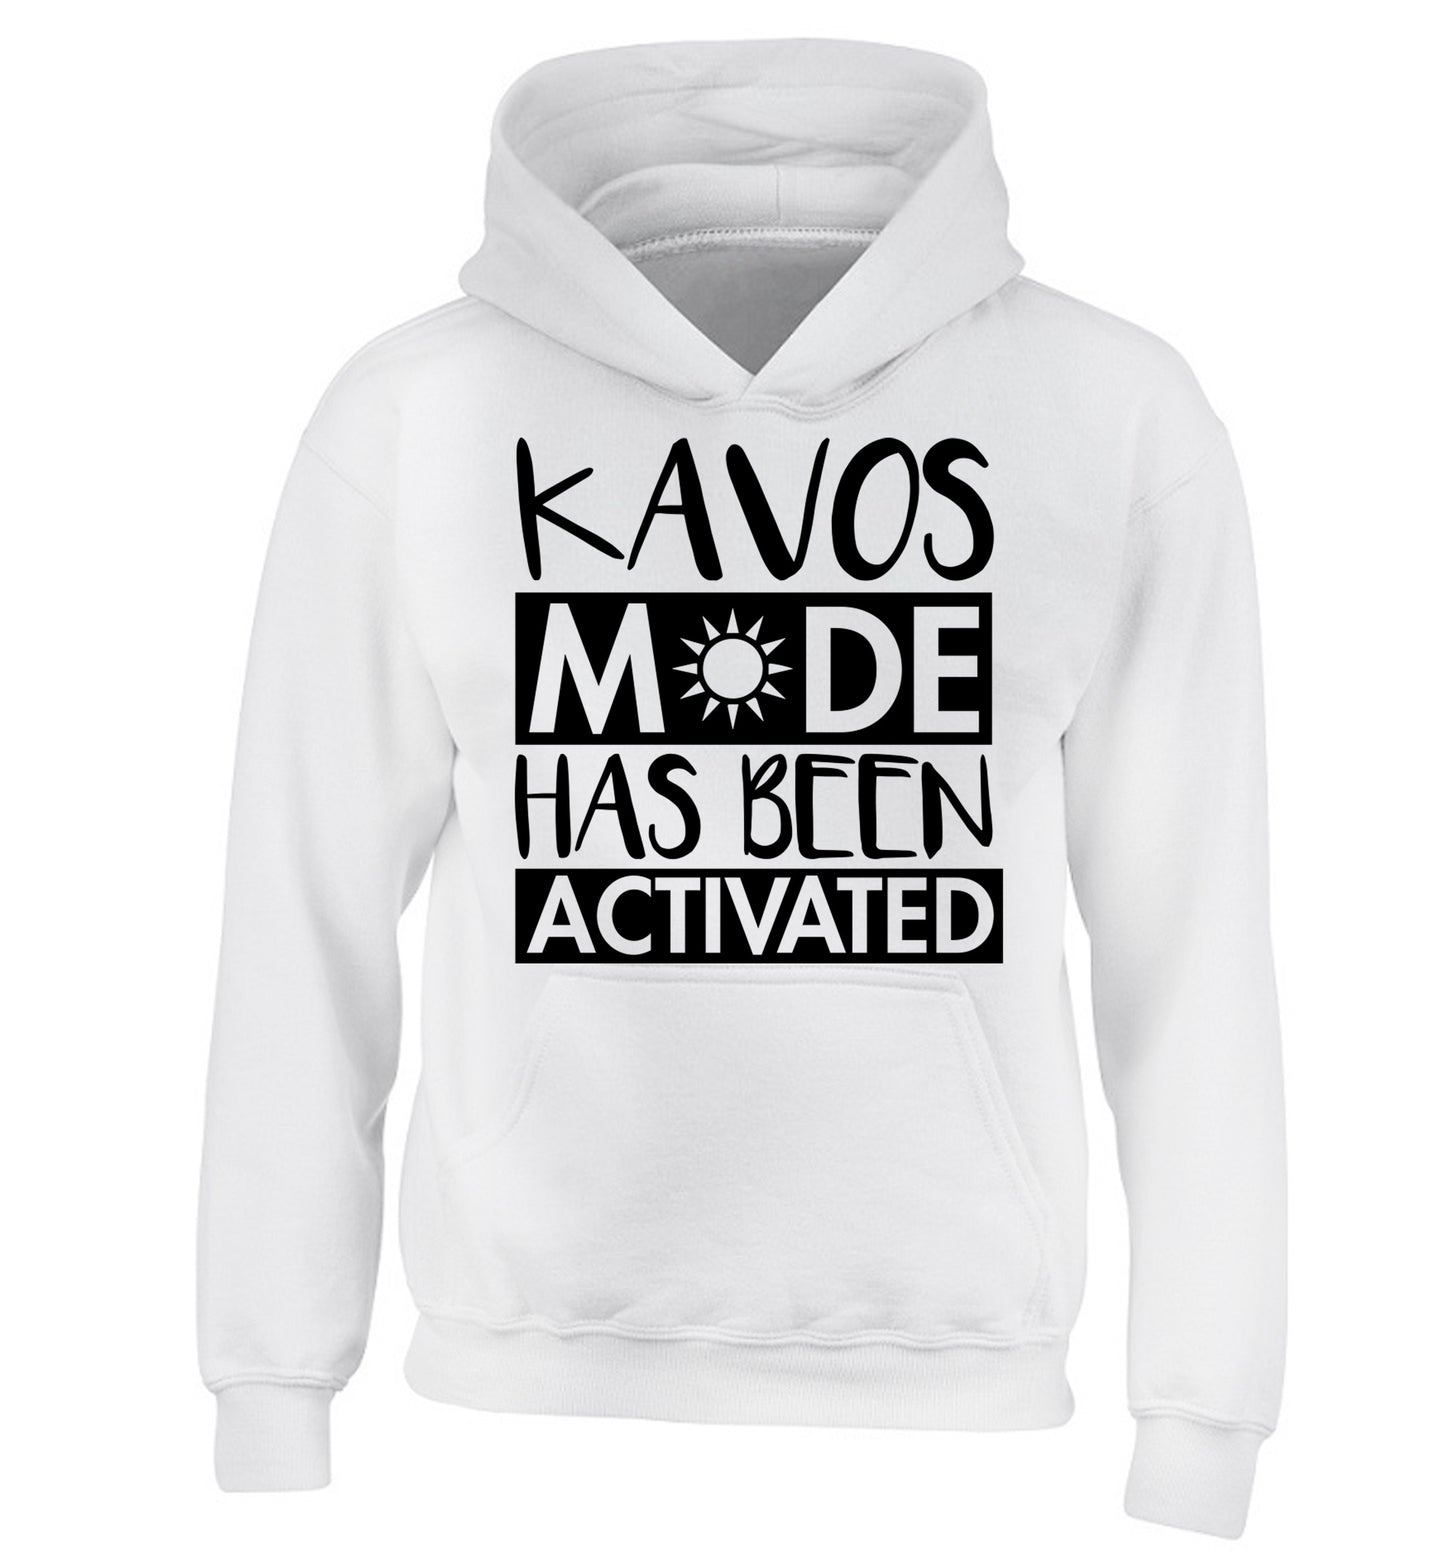 Kavos mode has been activated children's white hoodie 12-14 Years